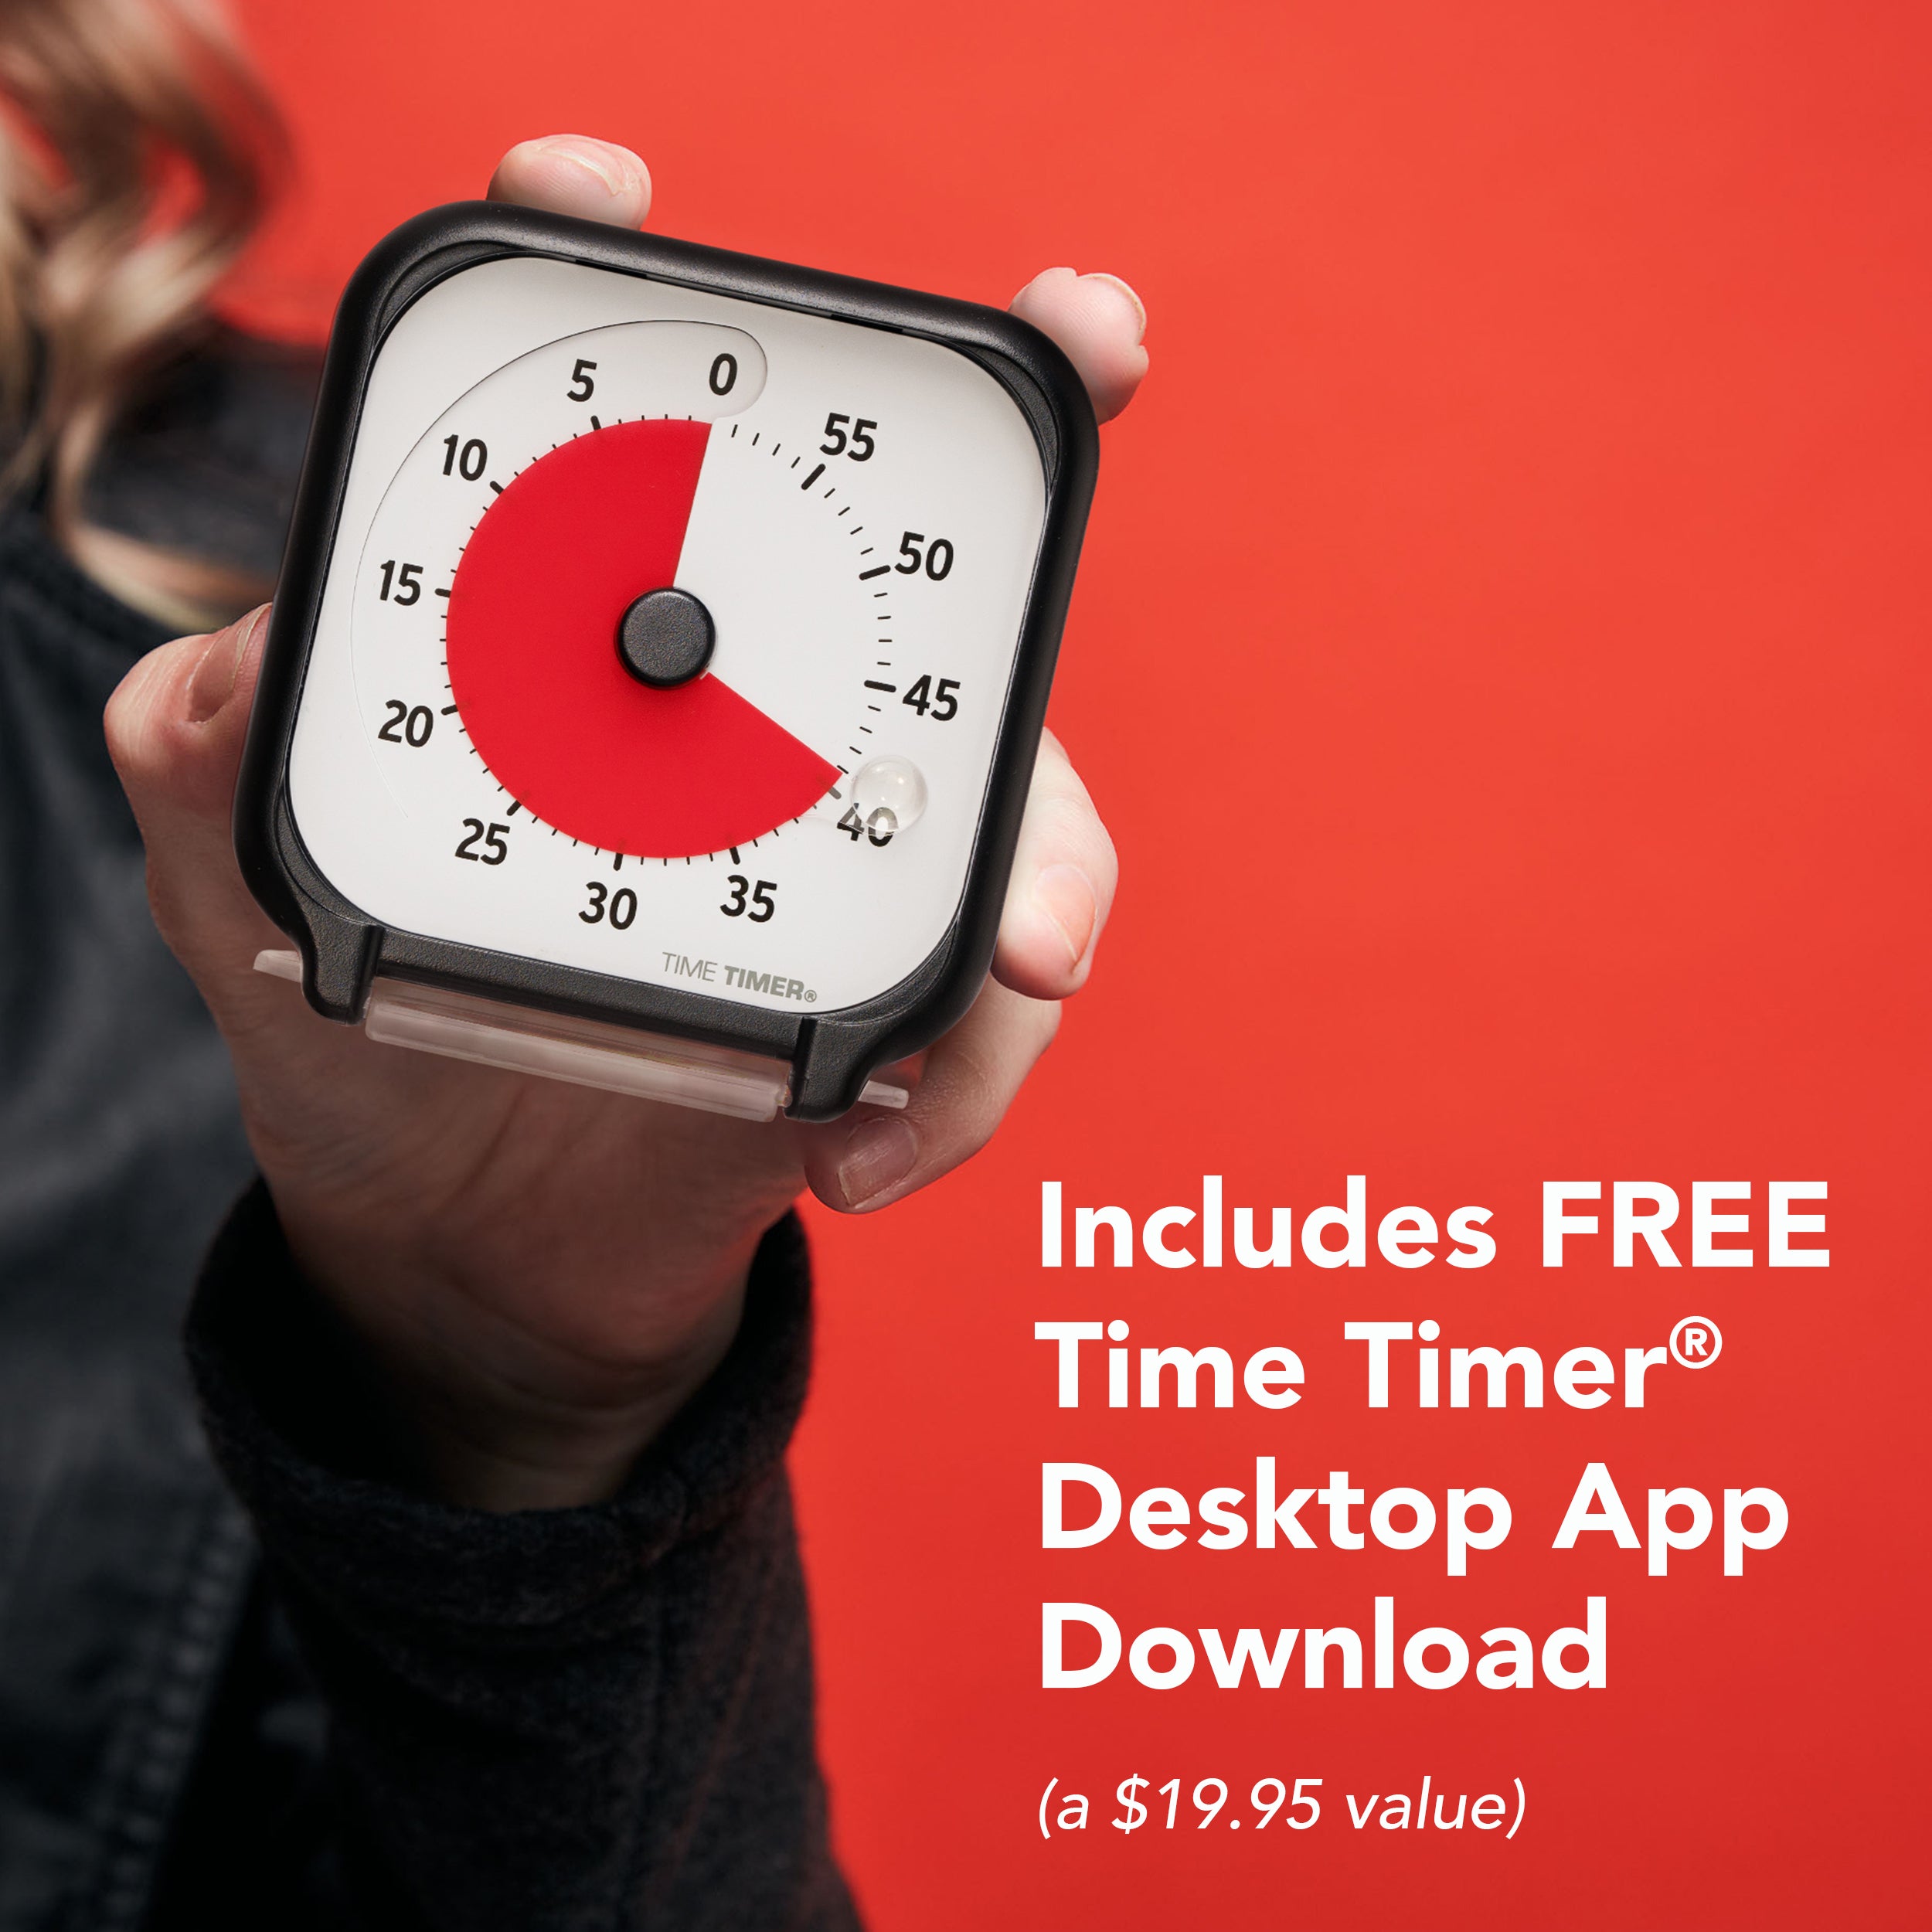 Time Timer is a small desktop sized timer. Shown here being held in woman's hand. The Time Timer Original 3" comes with a FREE Time Timer Desktop App Download, a retail value of $19.95.